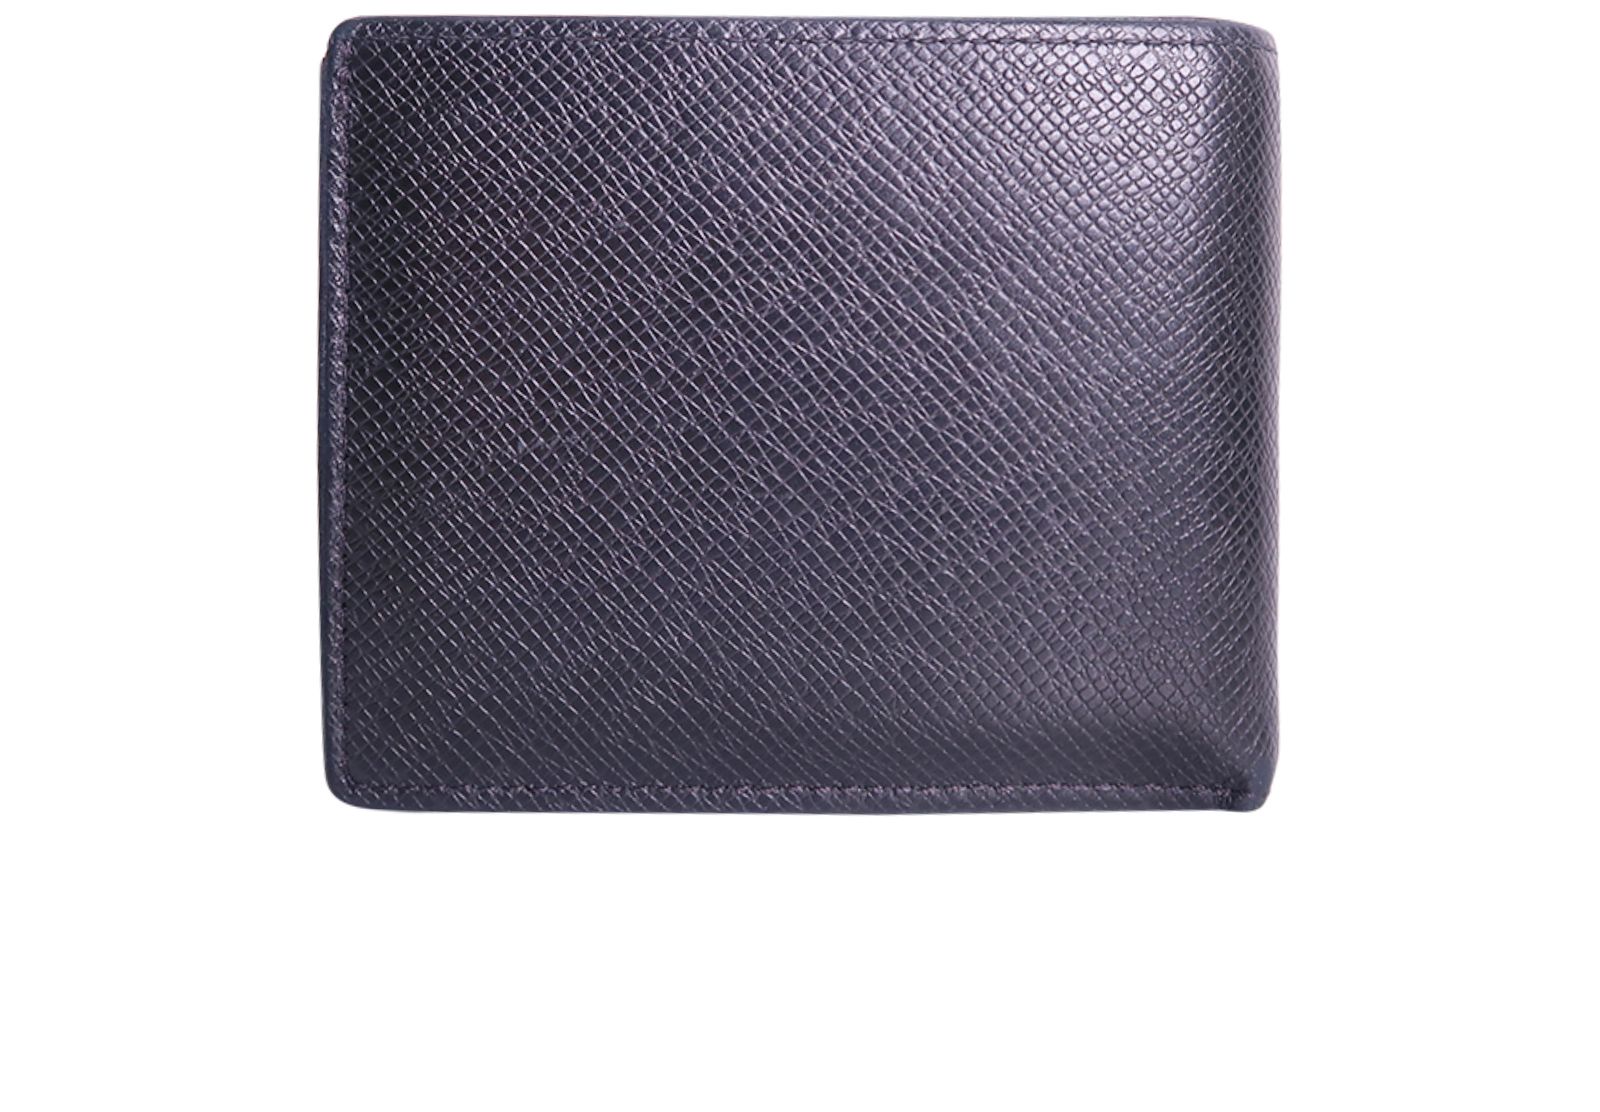 Multiple Wallet - SMALL LEATHER GOODS